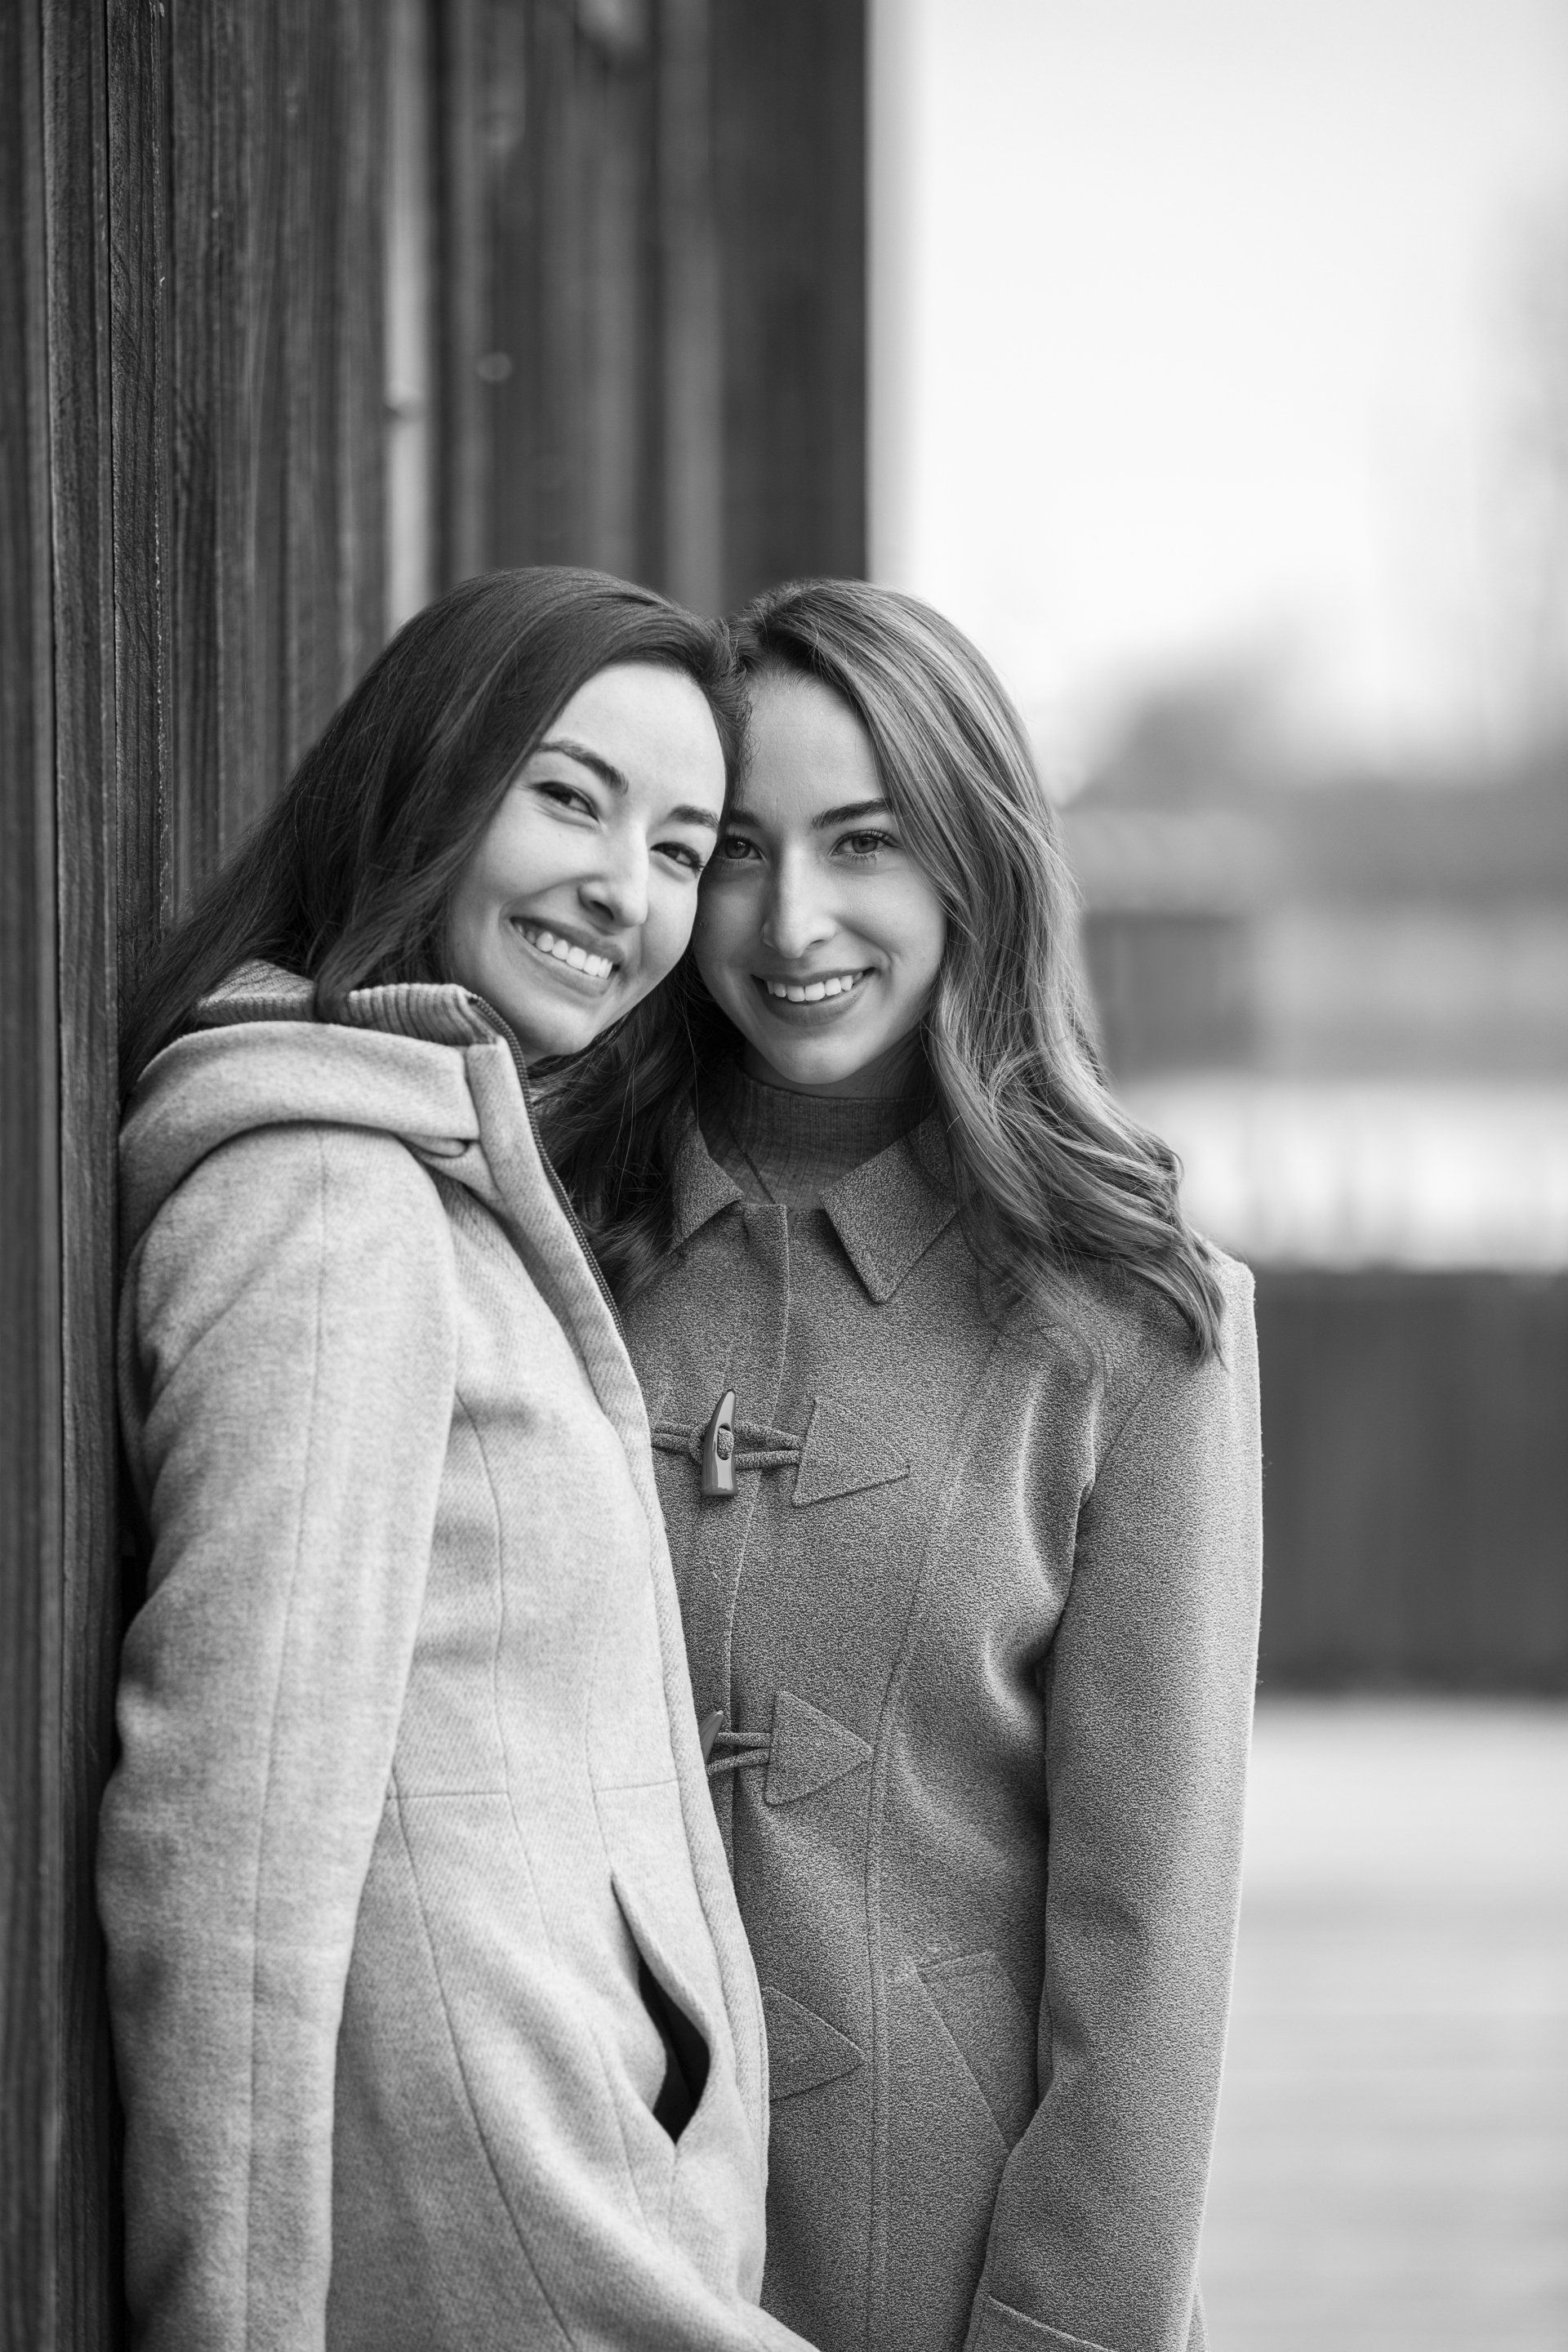 Natalie-DAngelo-Photography-Vancouver-BC-Canada-BlackWhite-Family-Portraits-Visual-Storyteller-happy-sisters-young-adults-portrait